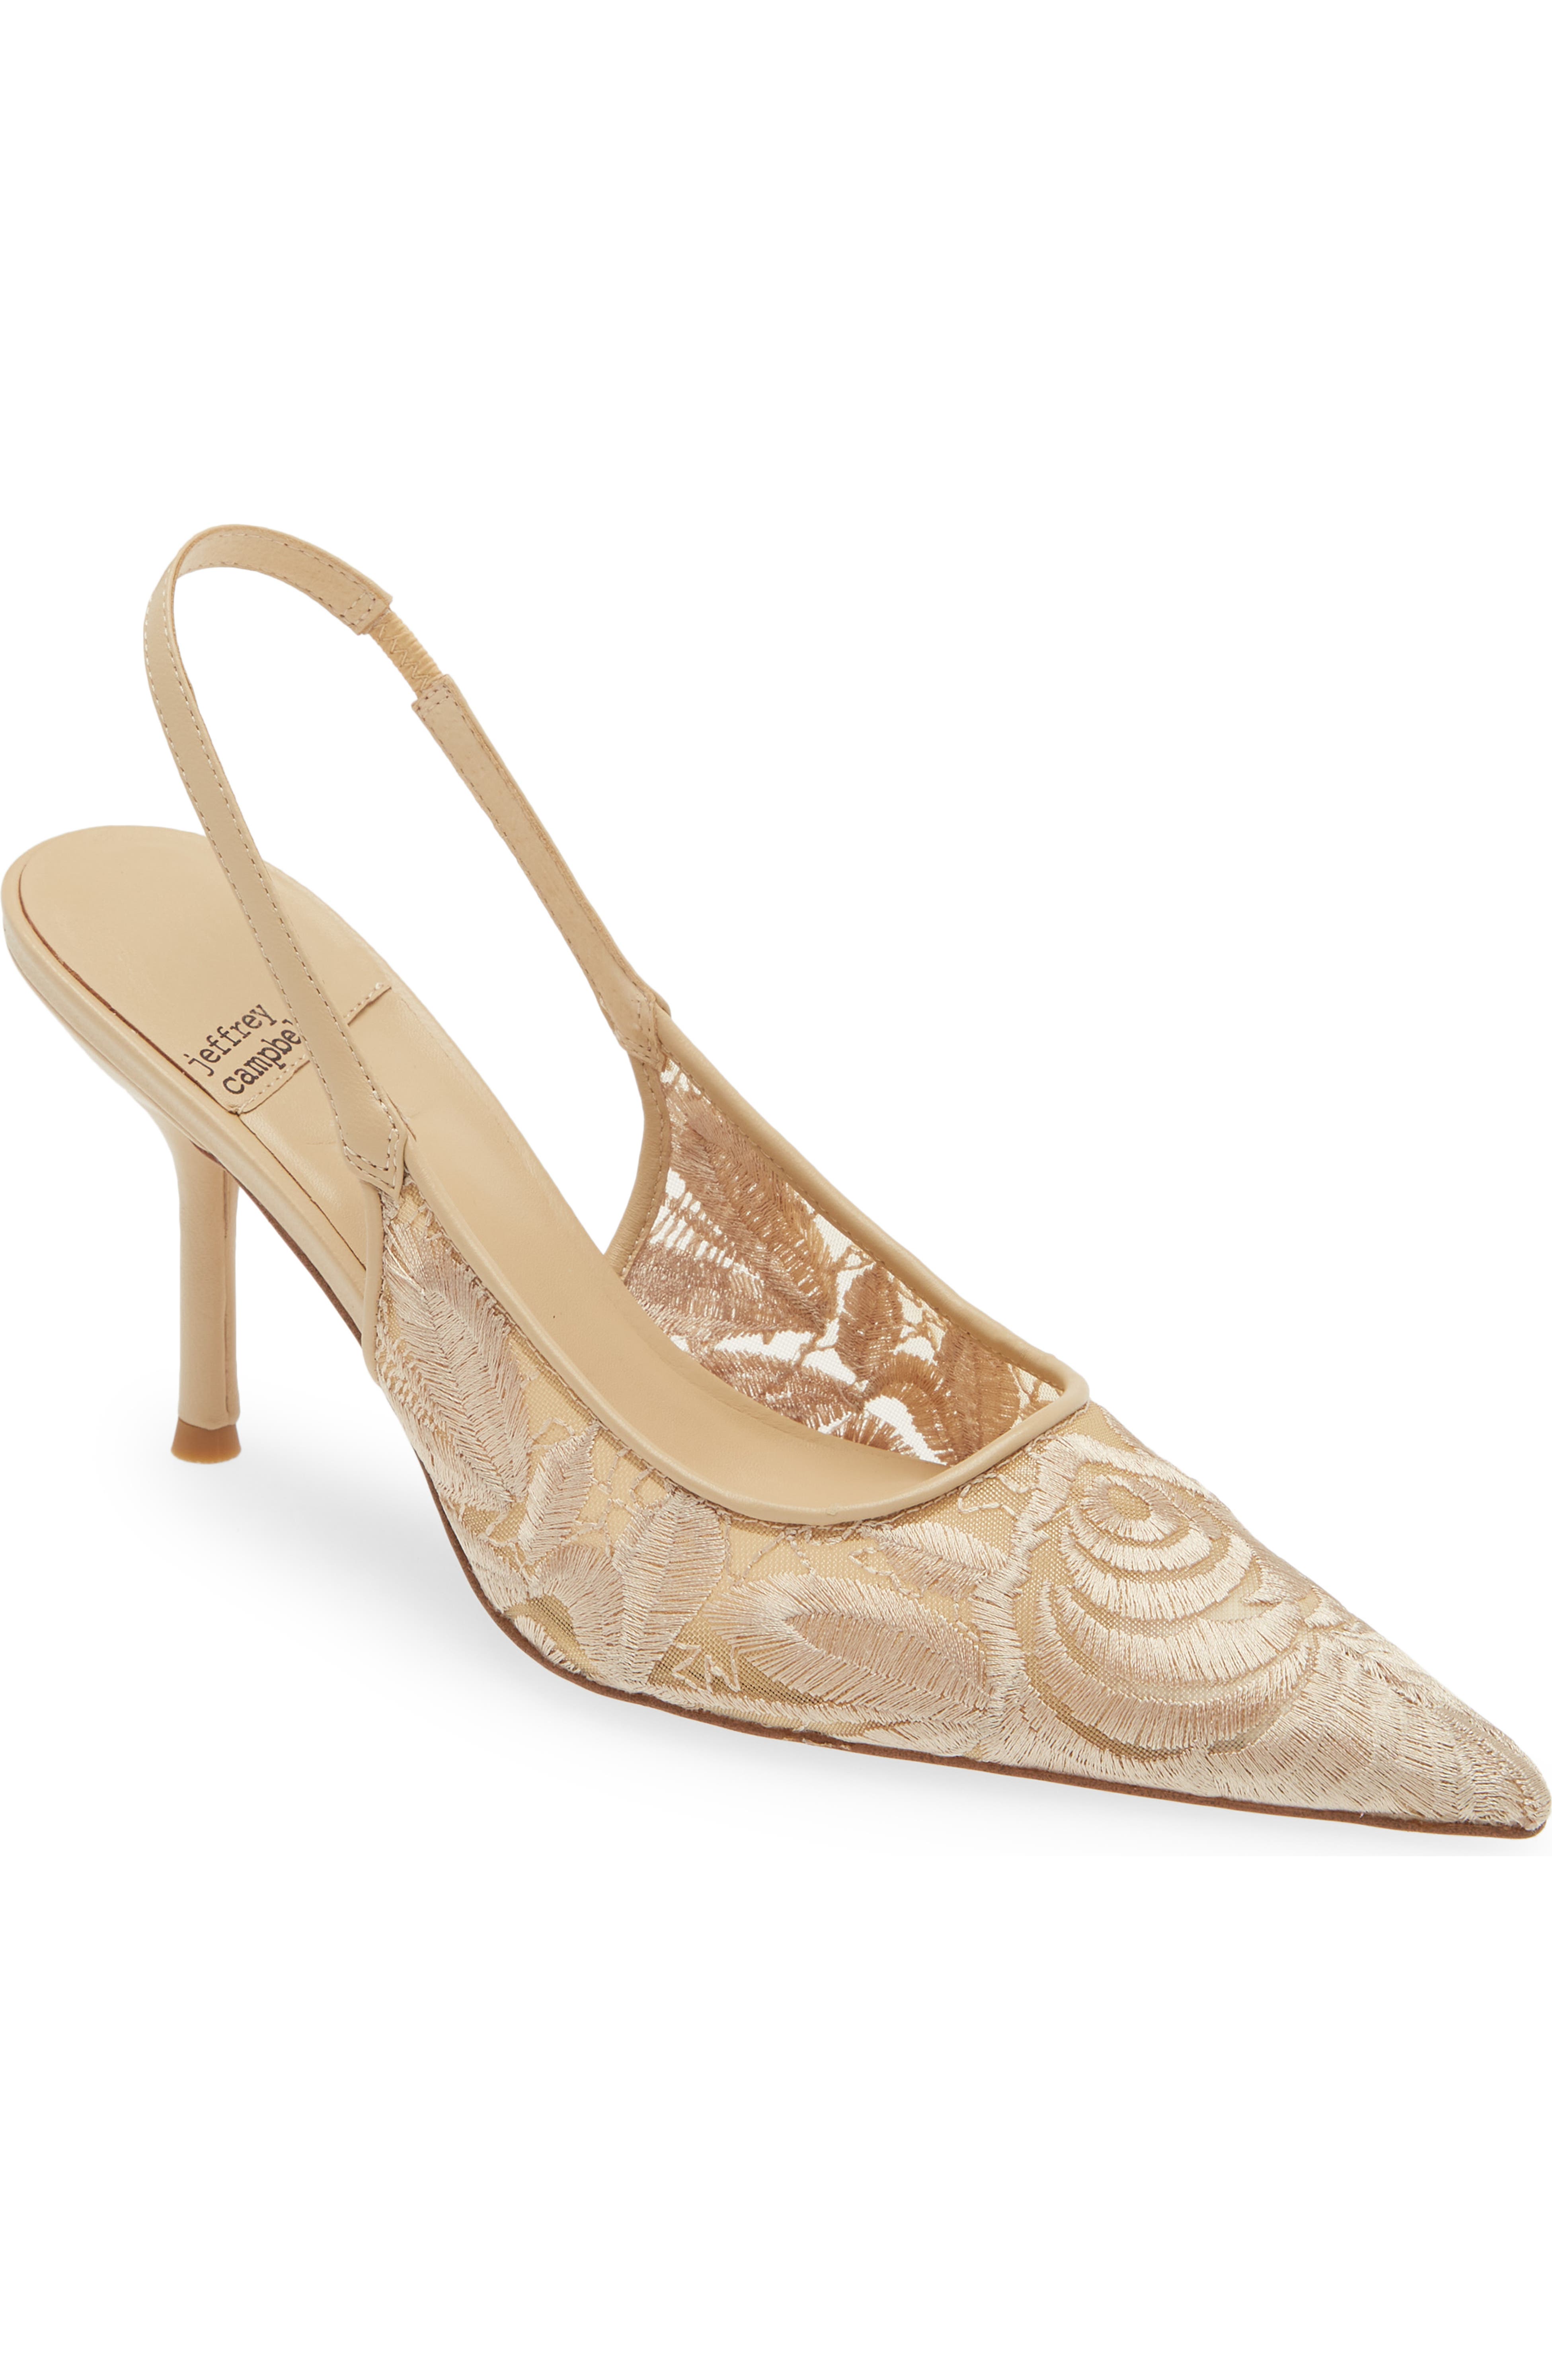 Jeffrey Campbell, Lofficele Embroidered Mesh Slingback Pointed Toe Pump